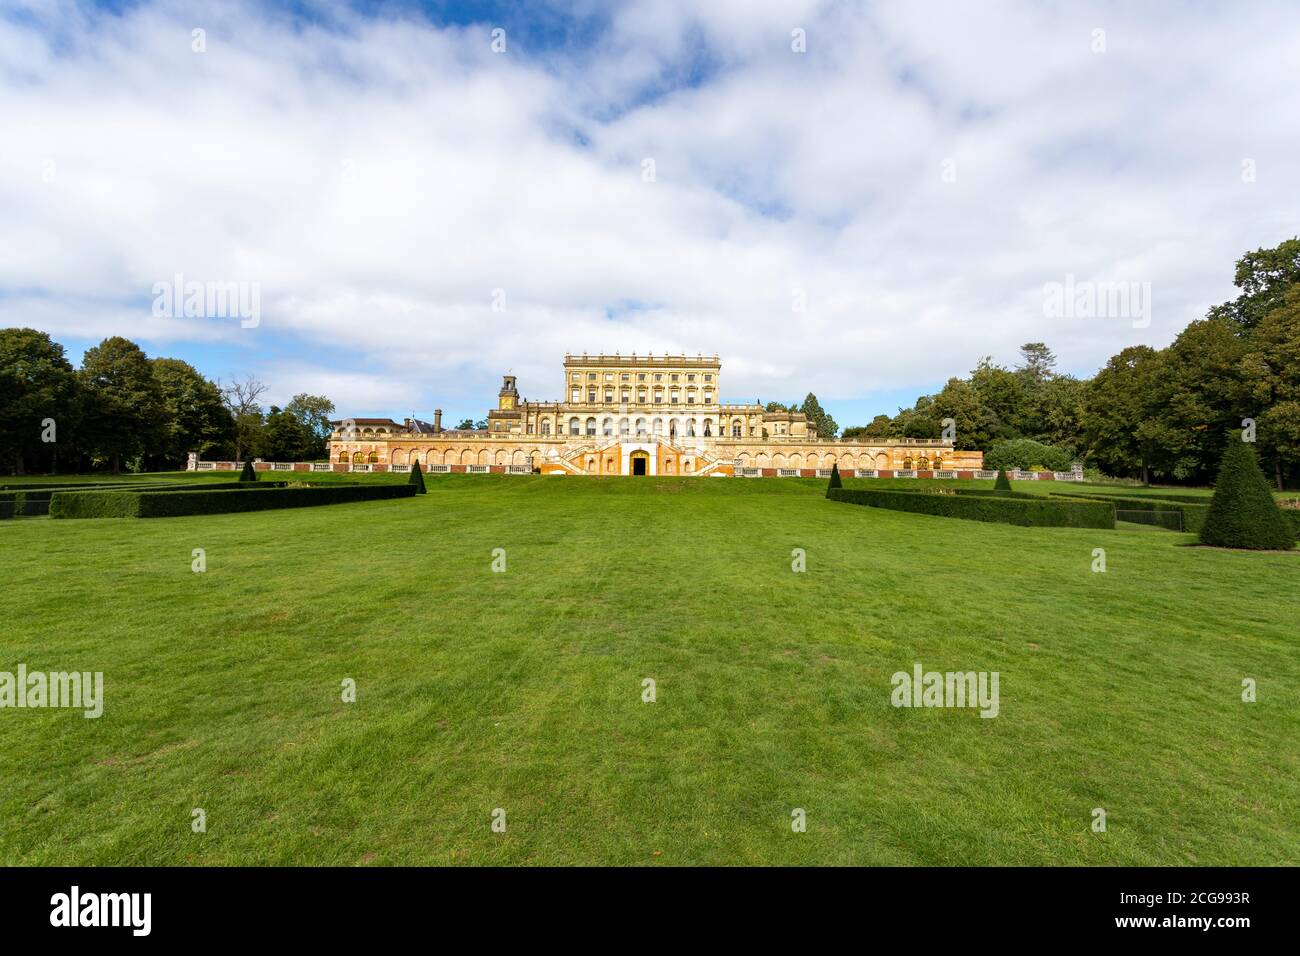 Cliveden House and Hotel, Buckinghamshire, England Stock Photo